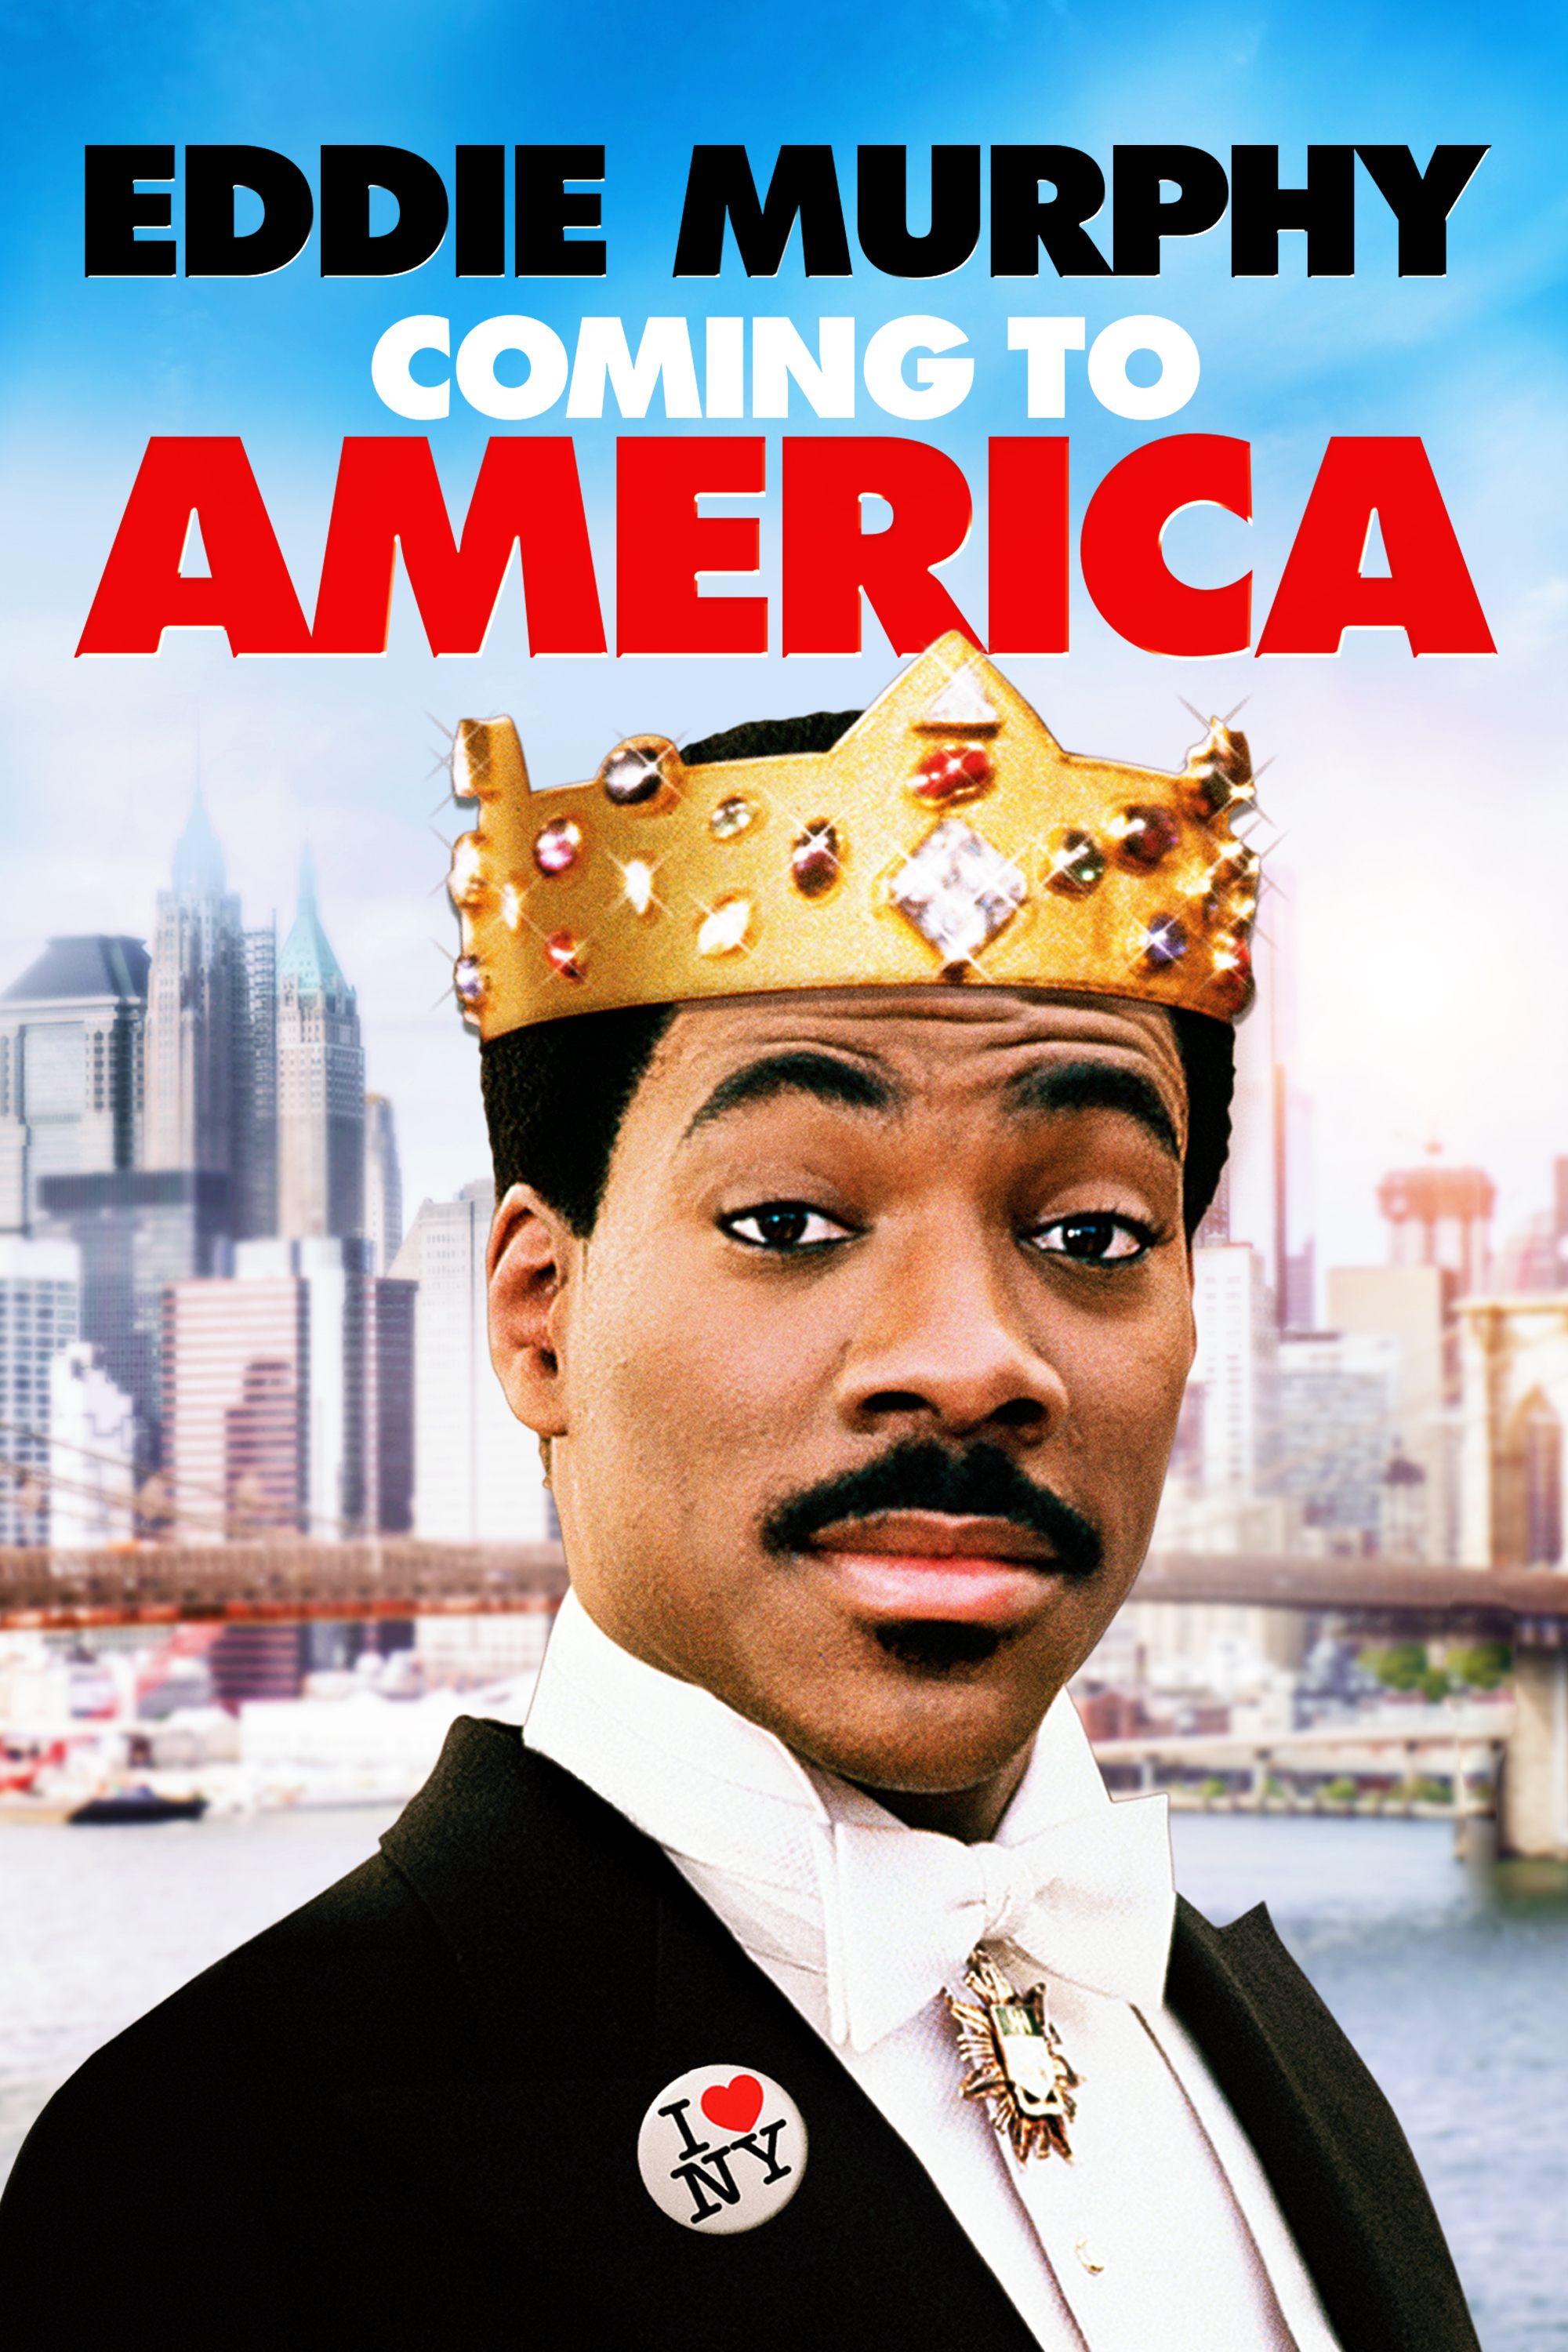 who did eddie murphy play in coming to america